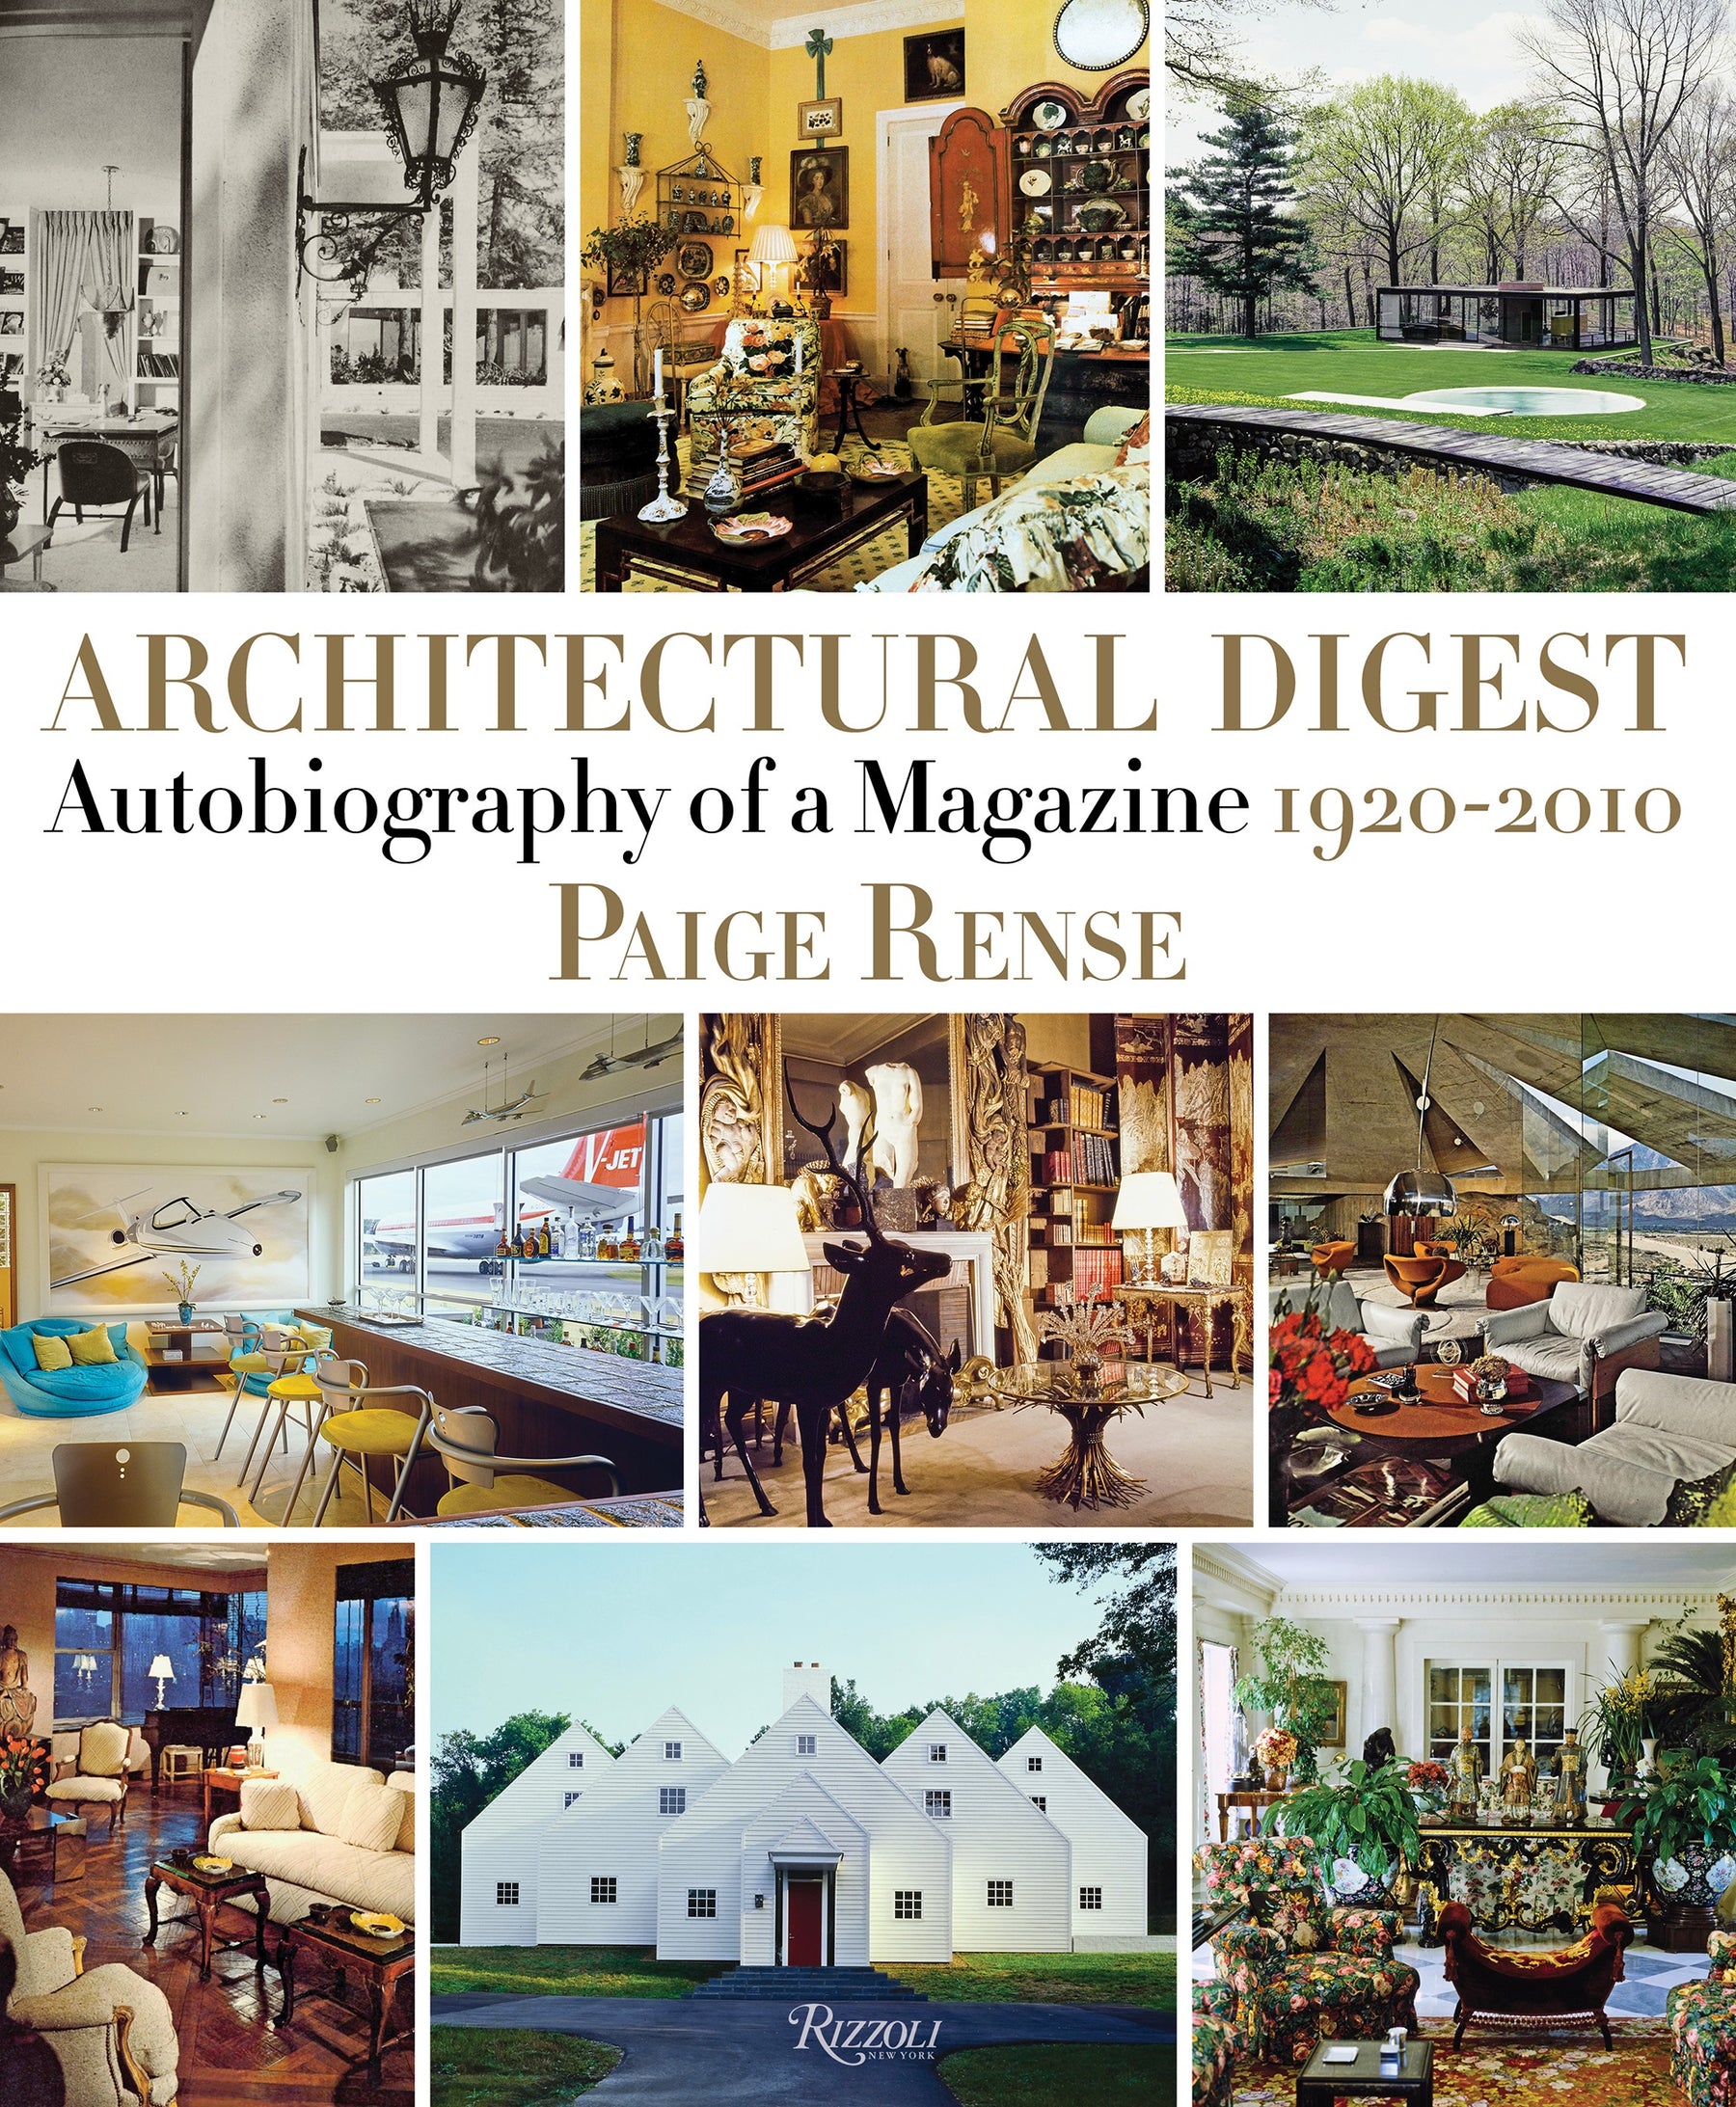 Architectural Digest Autobiography of a Magazine 1920-2010